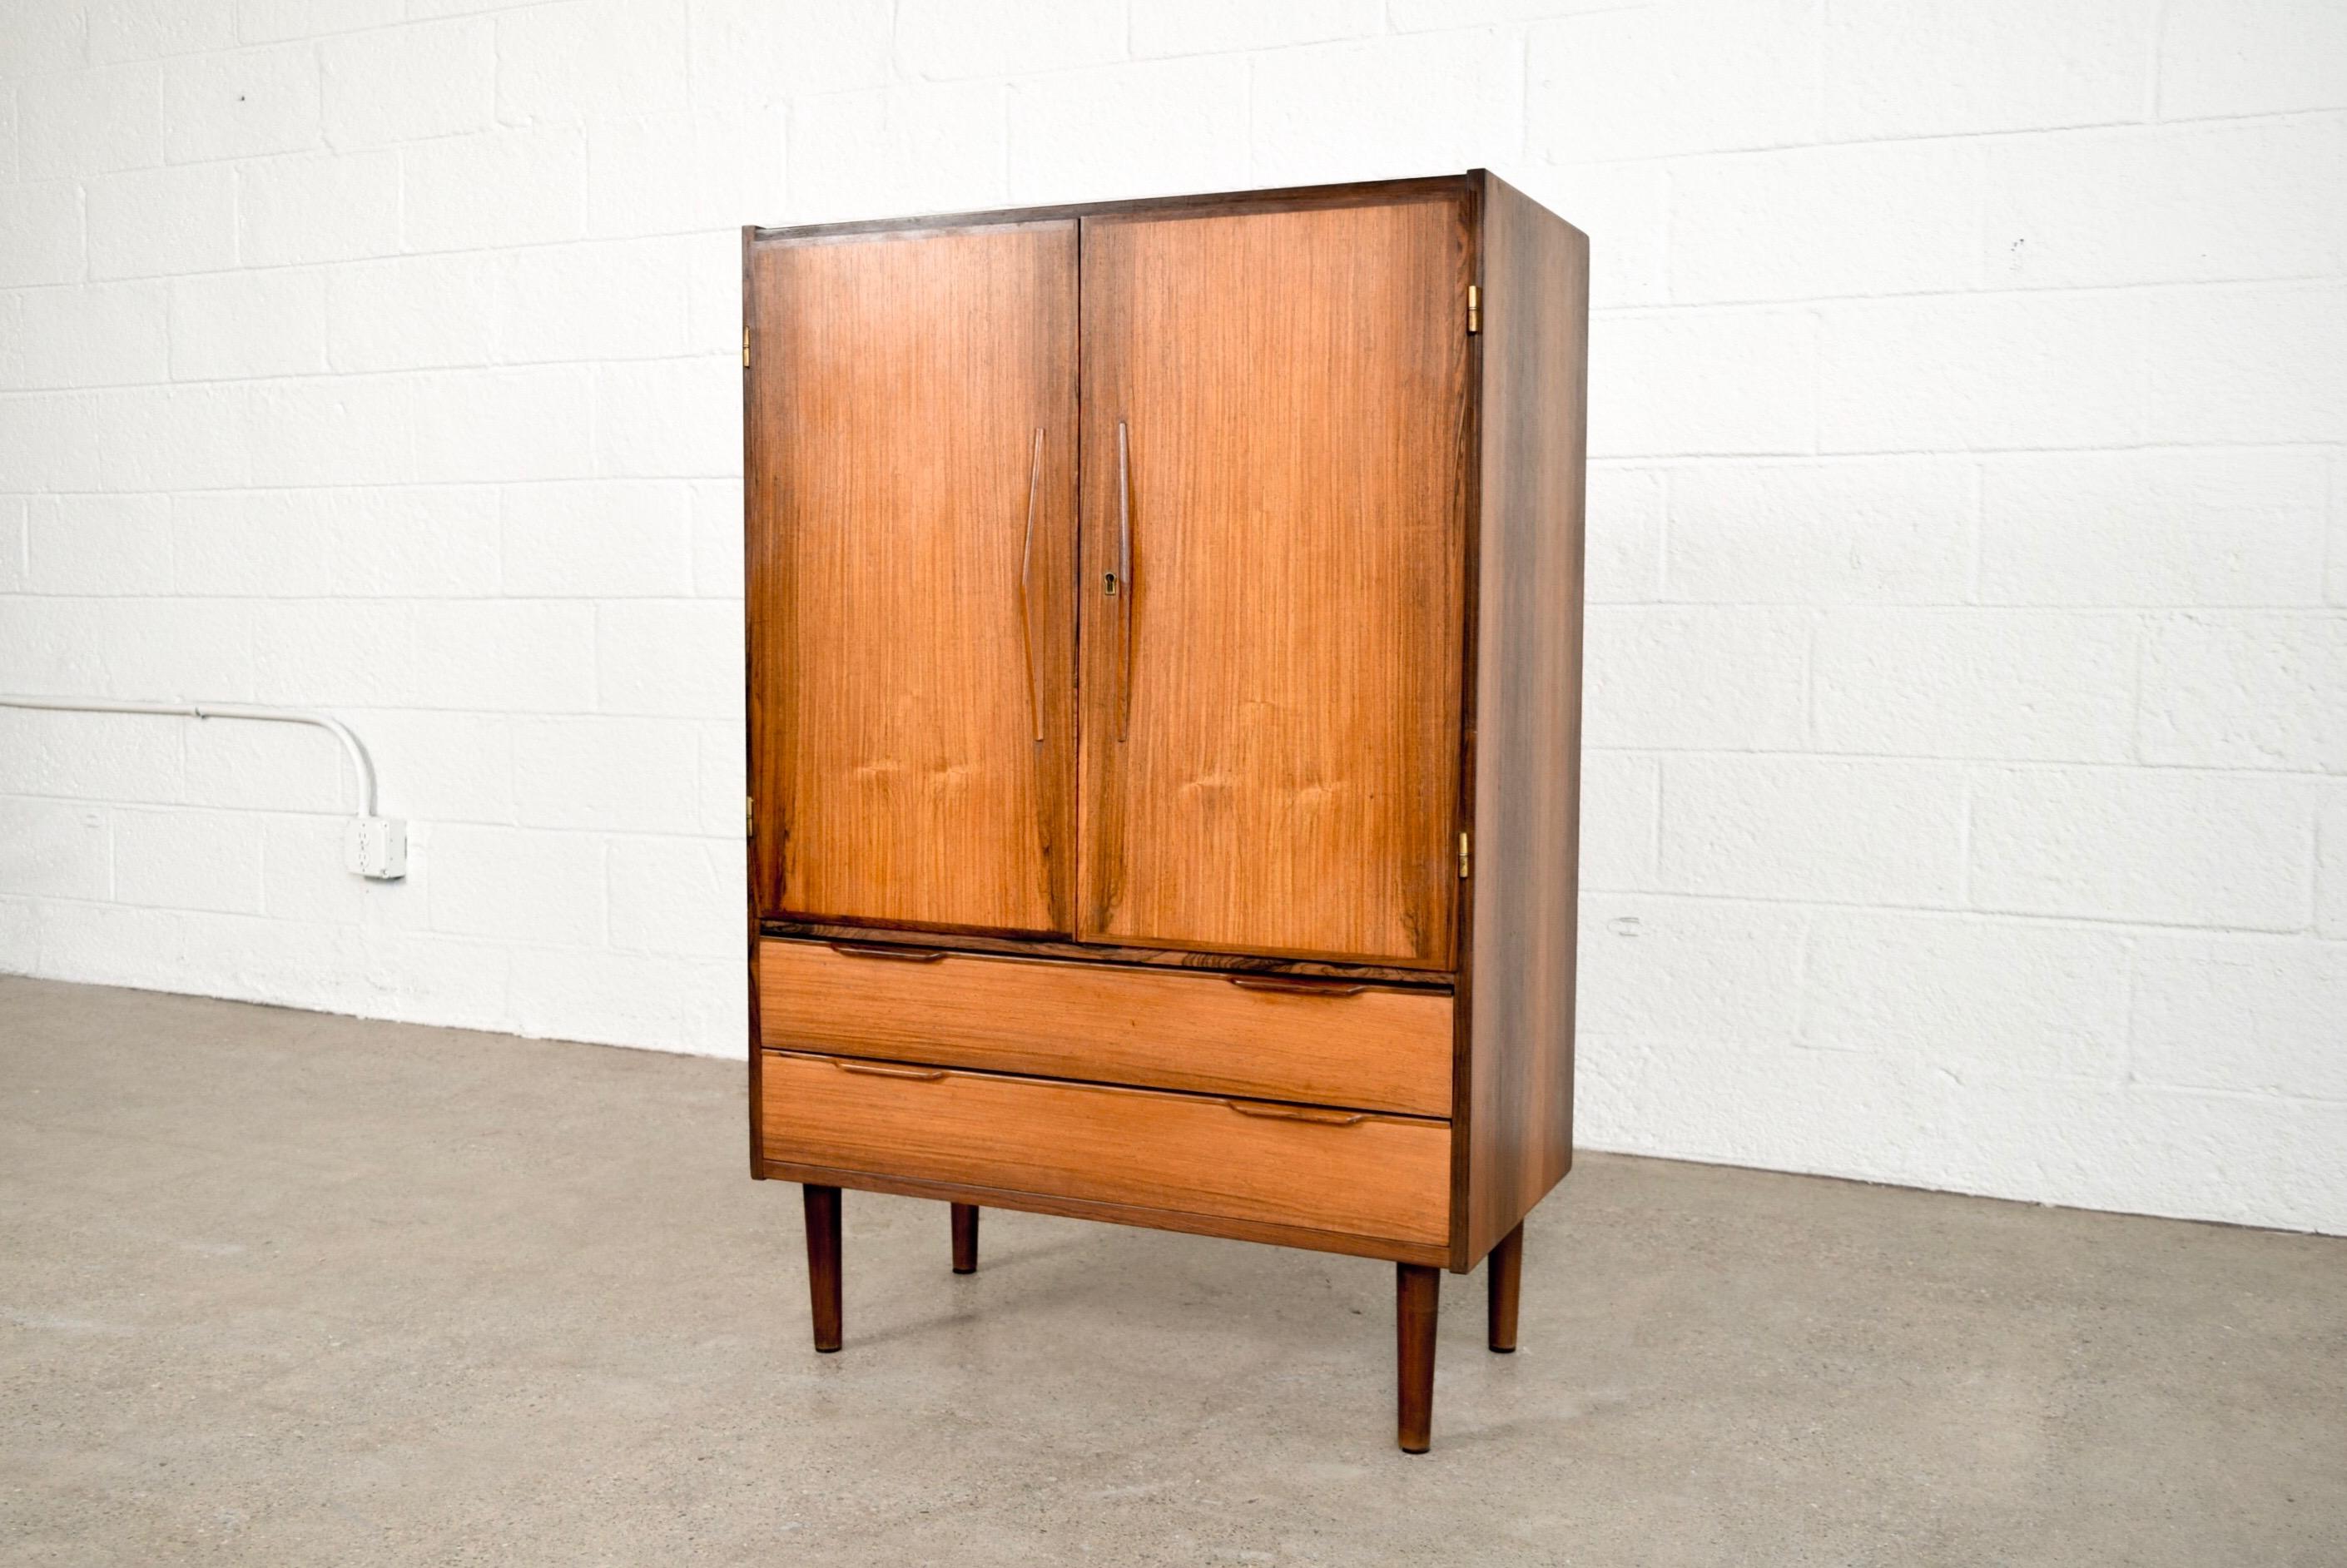 This striking vintage midcentury Danish modern bar cabinet in the manner of Arne Vodder or Finn Juhl and circa 1960 is expertly crafted from Brazilian rosewood with stunning wood grain. With a Classic Danish modern design it has clean Minimalist